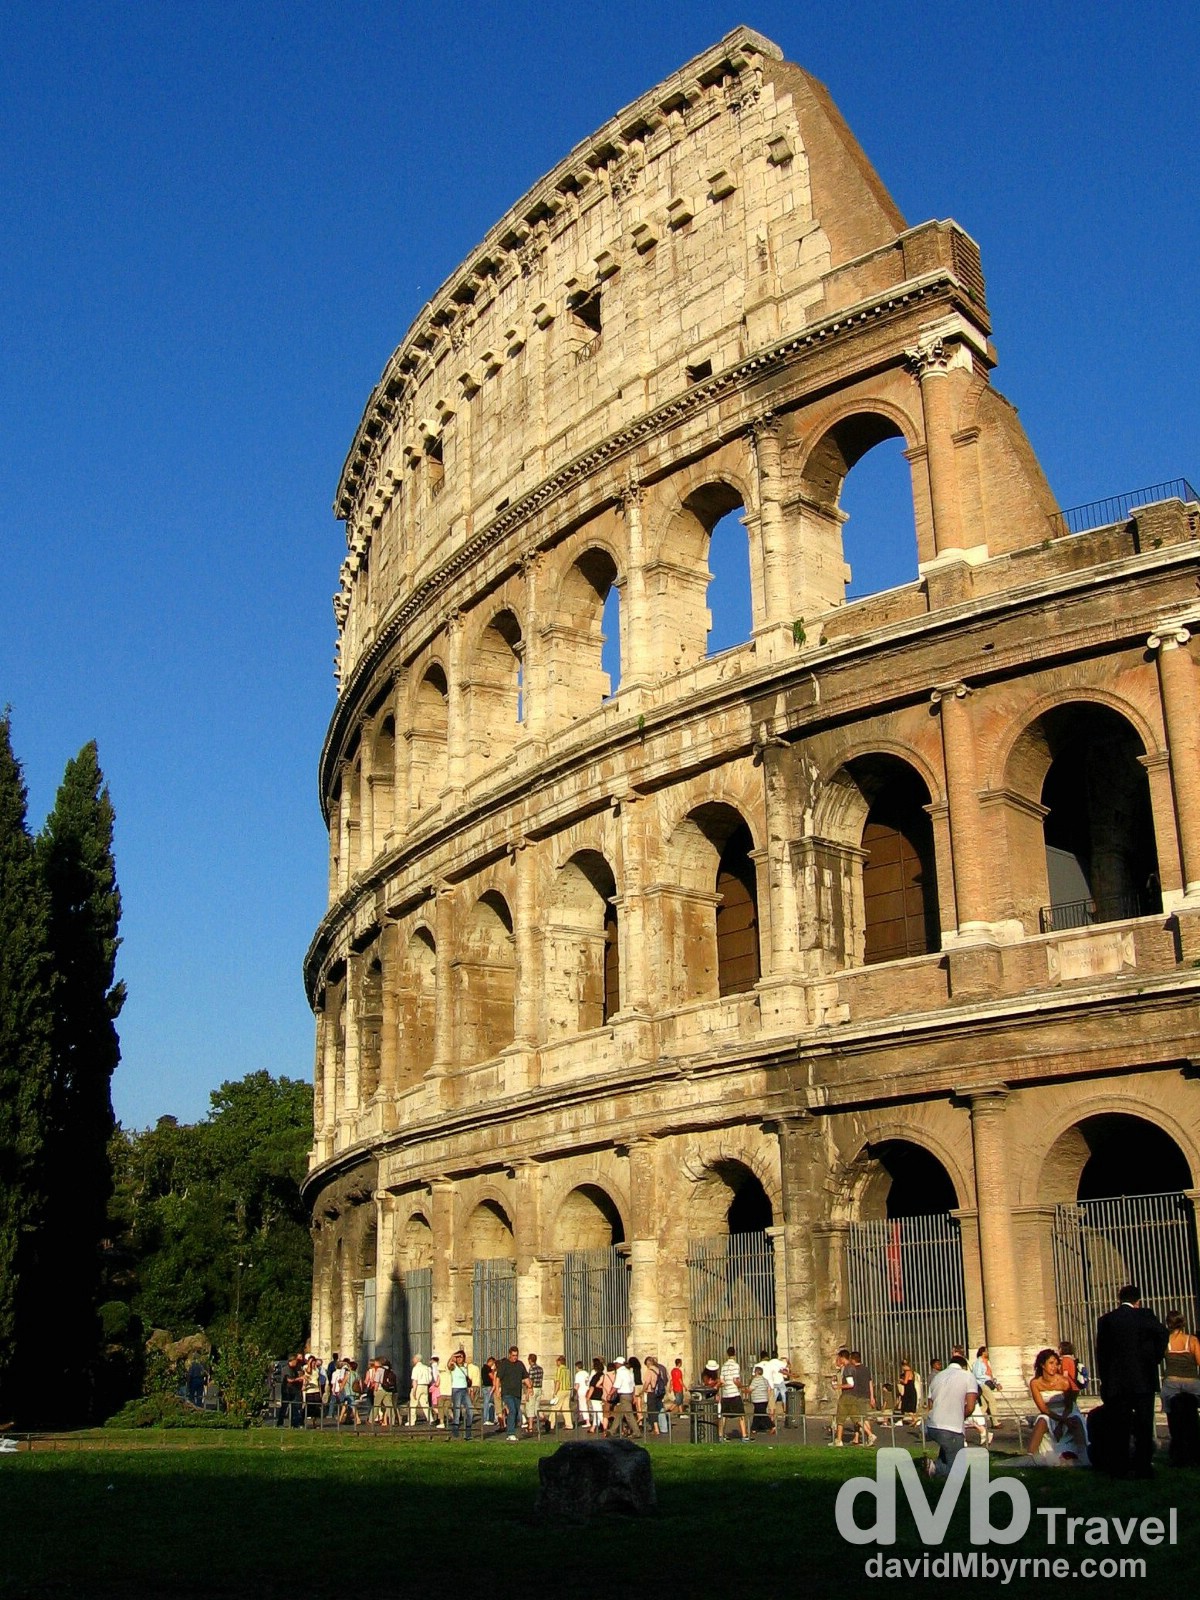 Walking by a section of the external facade of the Colosseum in Rome, Italy. September 1st, 2007. 